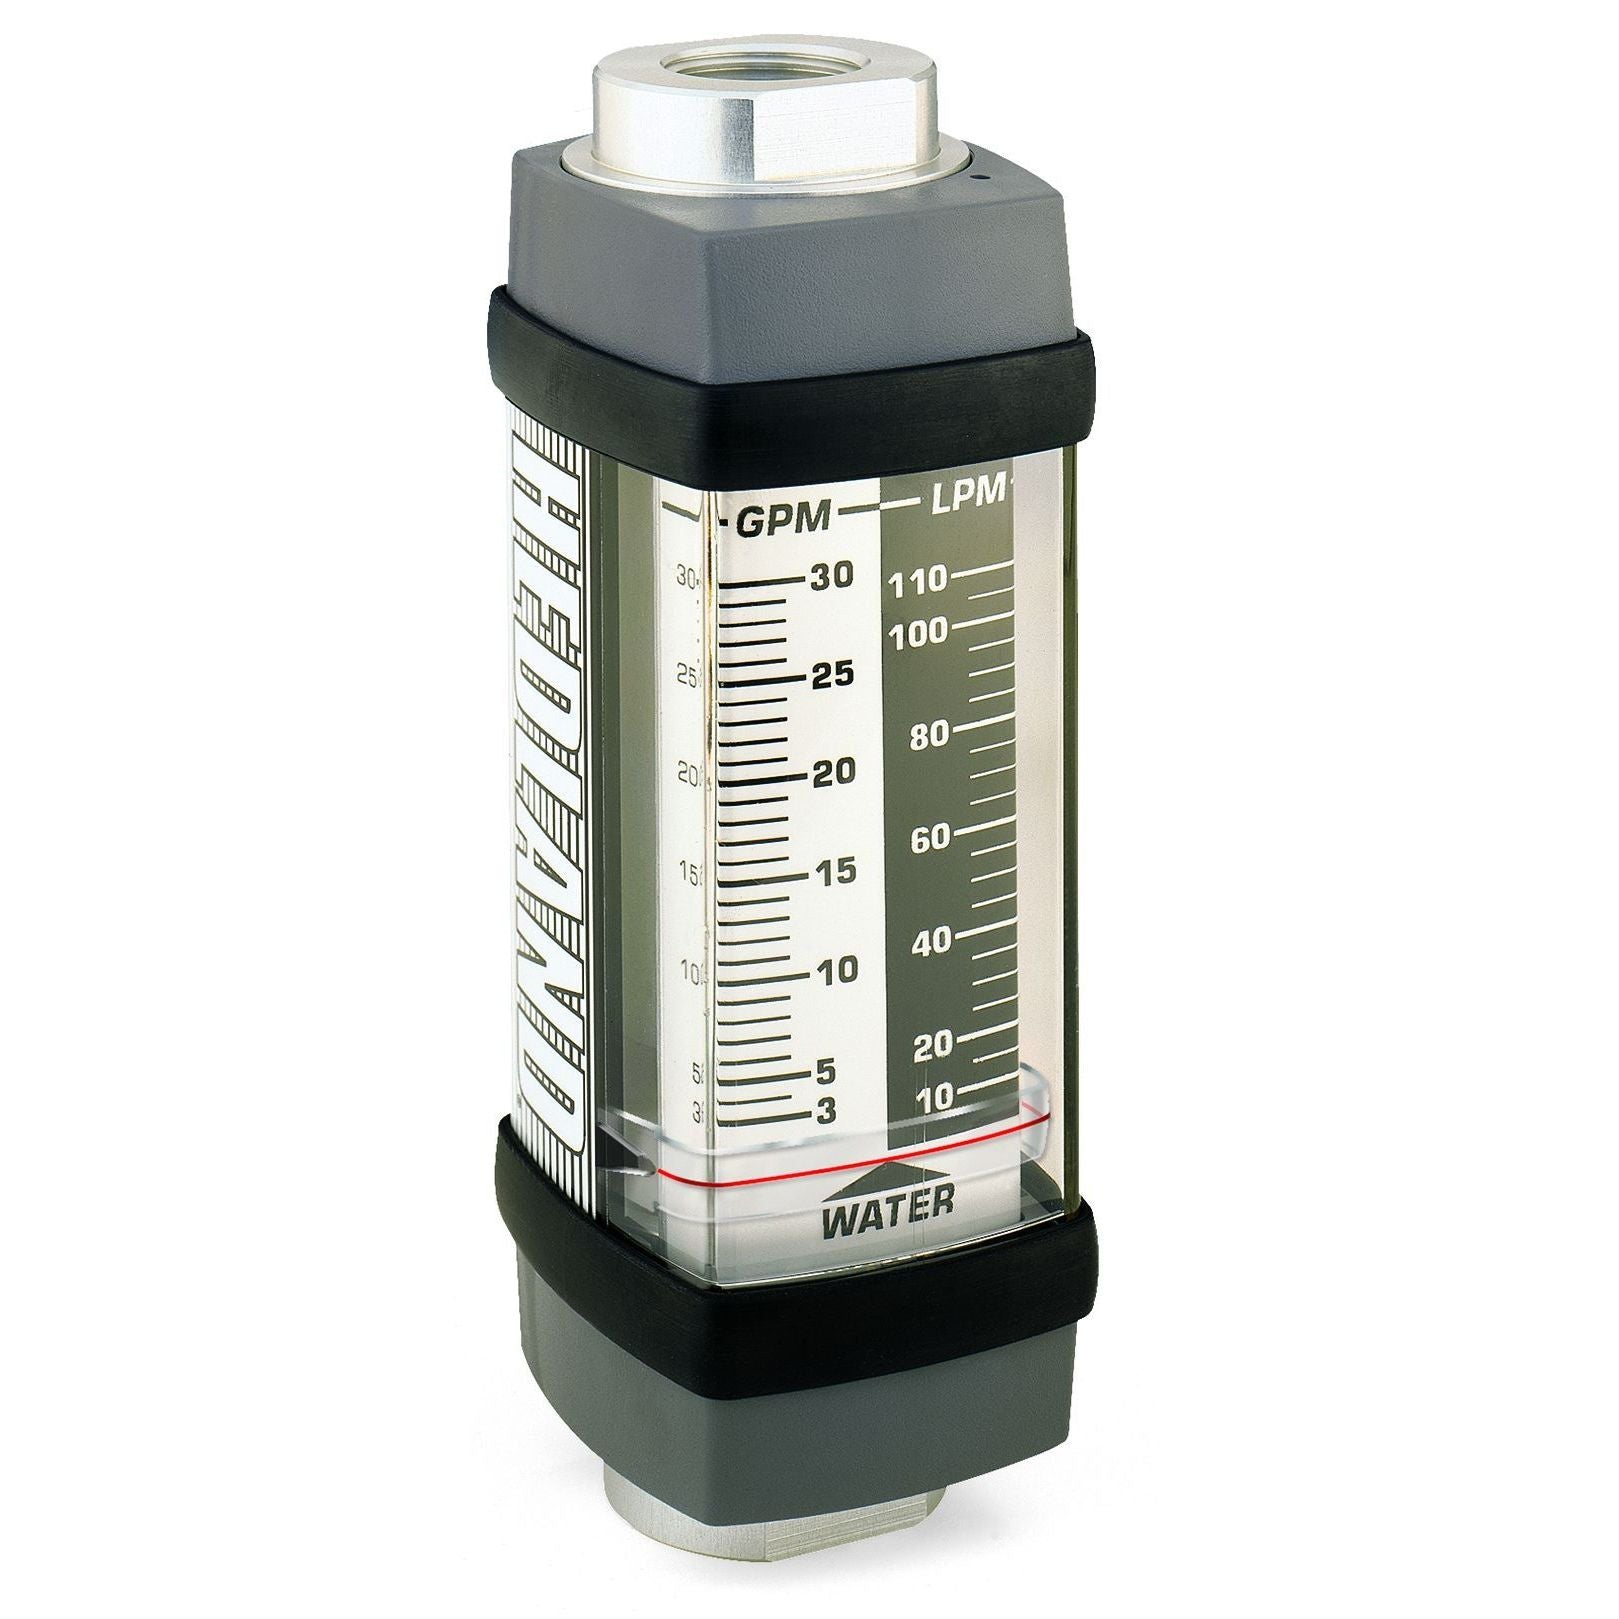 H844X-050 : Hedland 5000psi 316SS Flow Meter for Caustic or Corrosive Liquids, 1 NPT, 5 to 50 GPM